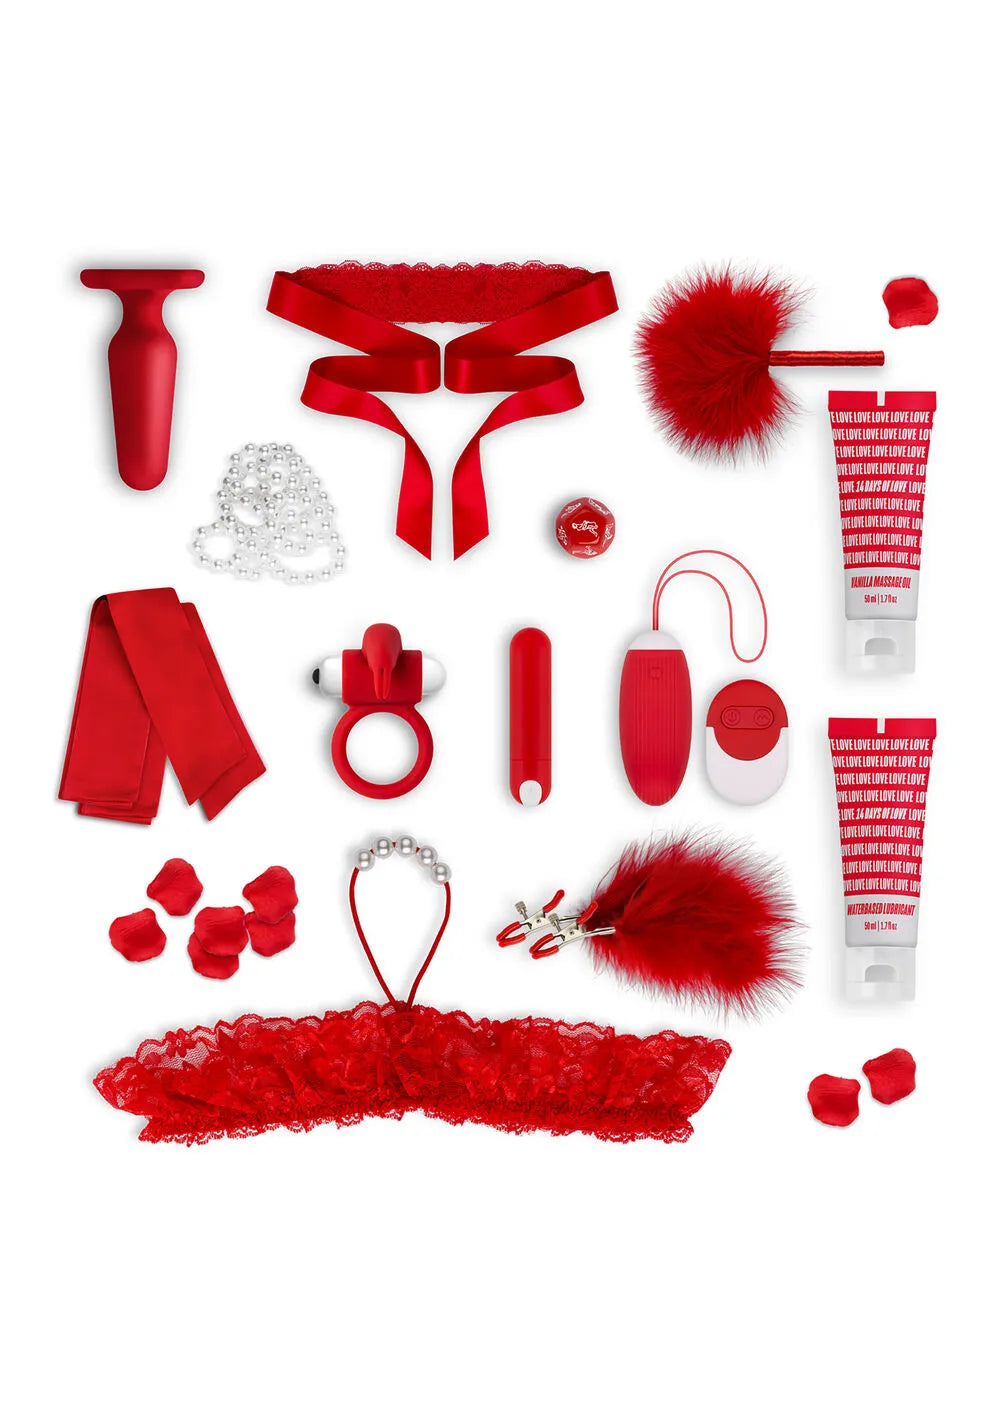 14 Days of Love Gift Set From Ann Summers, Image 1